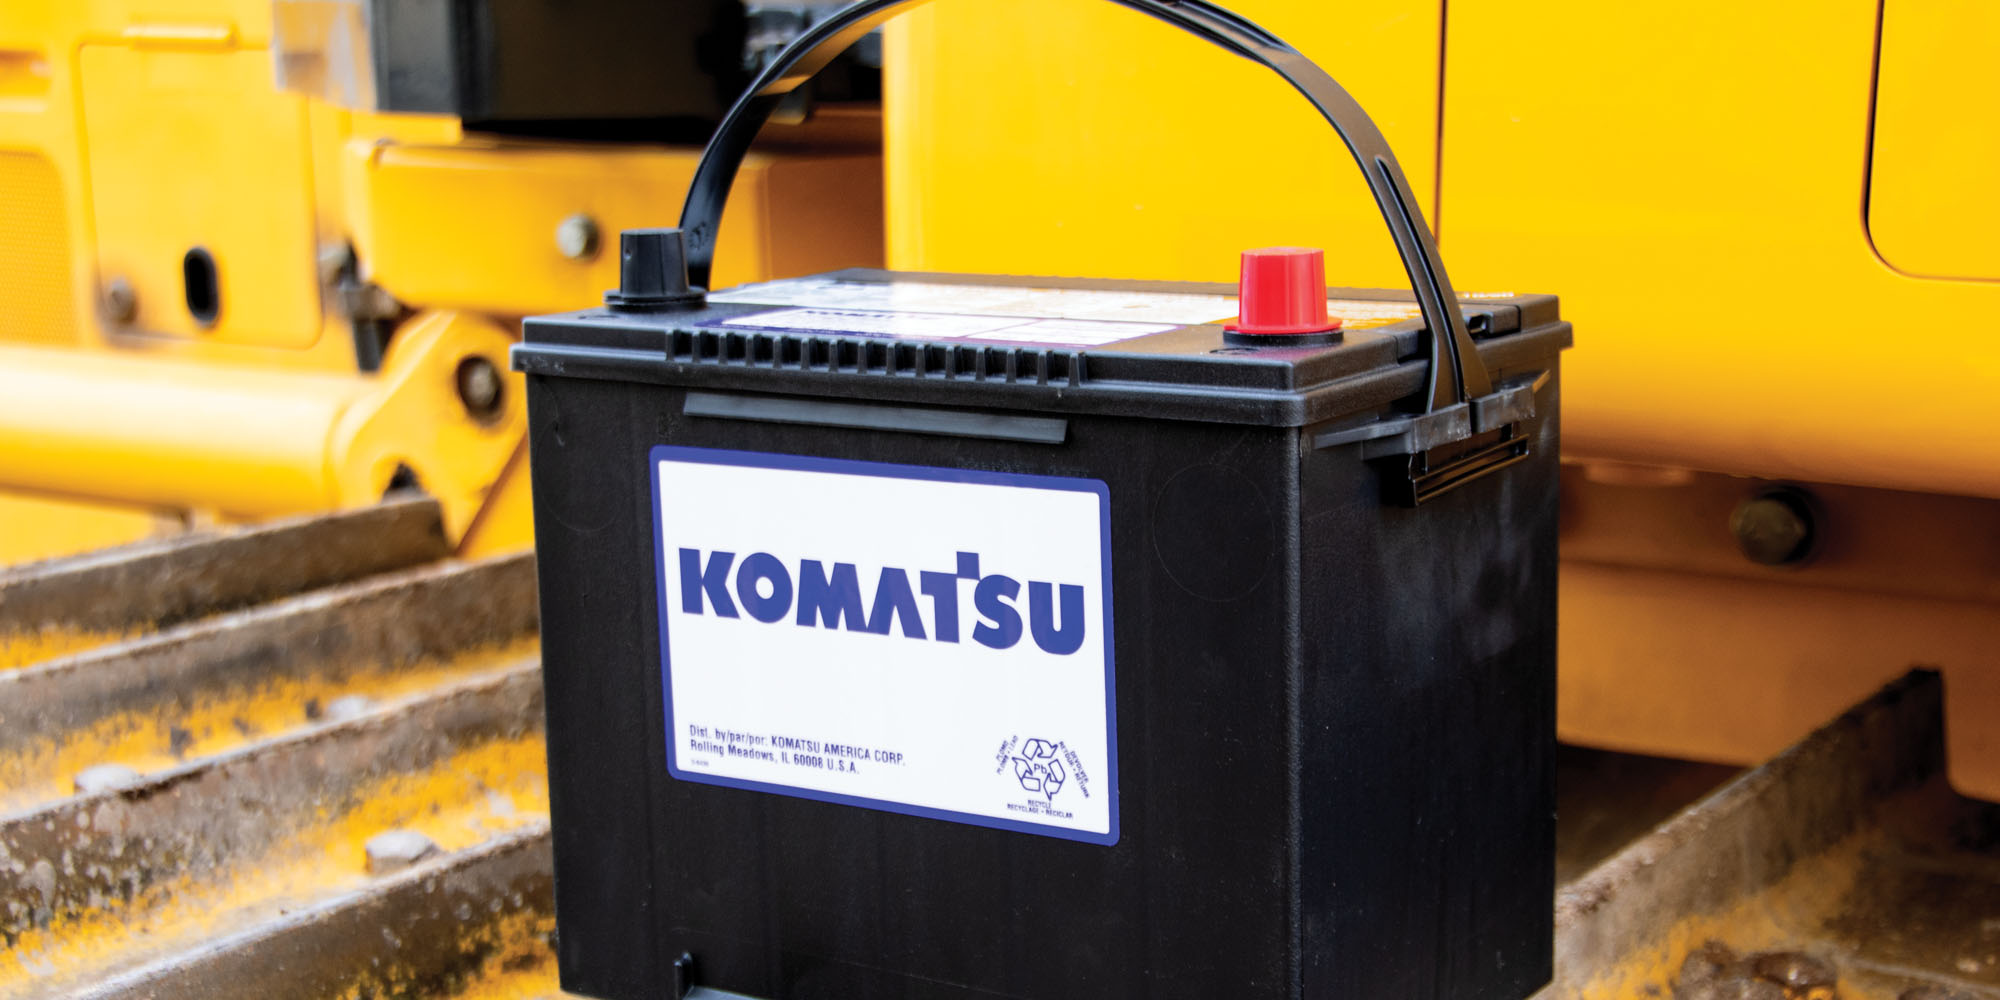 Komatsu Offers a Wide Range of Genuine Batteries Proven to Perform and Last in Tough Conditions